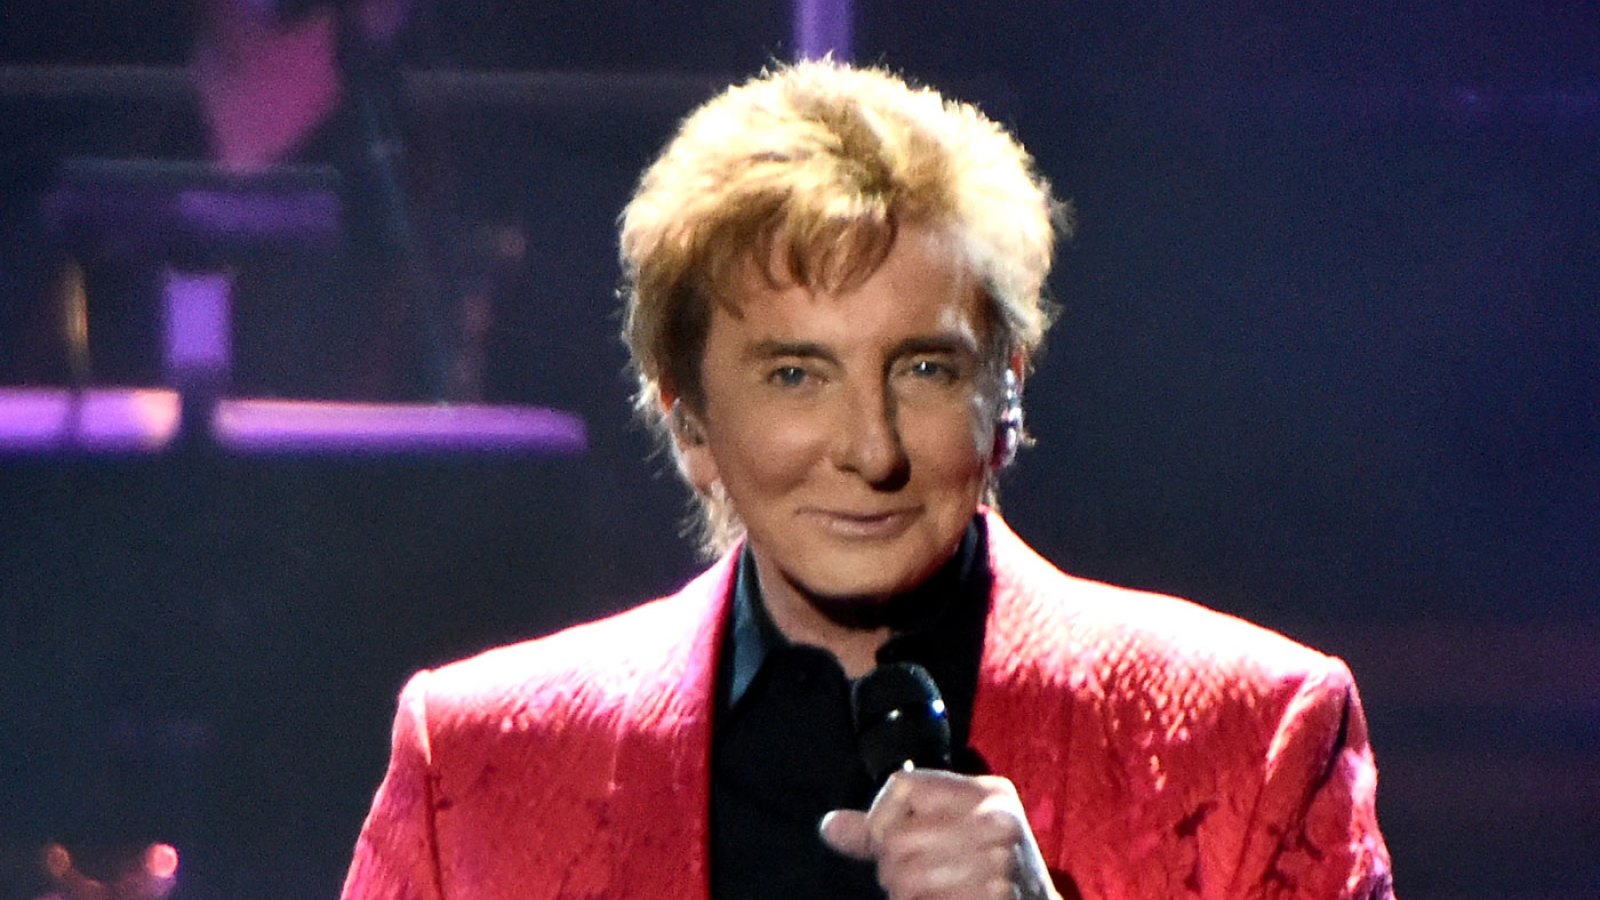 Barry Manilow was rushed to hospital on Wednesday night